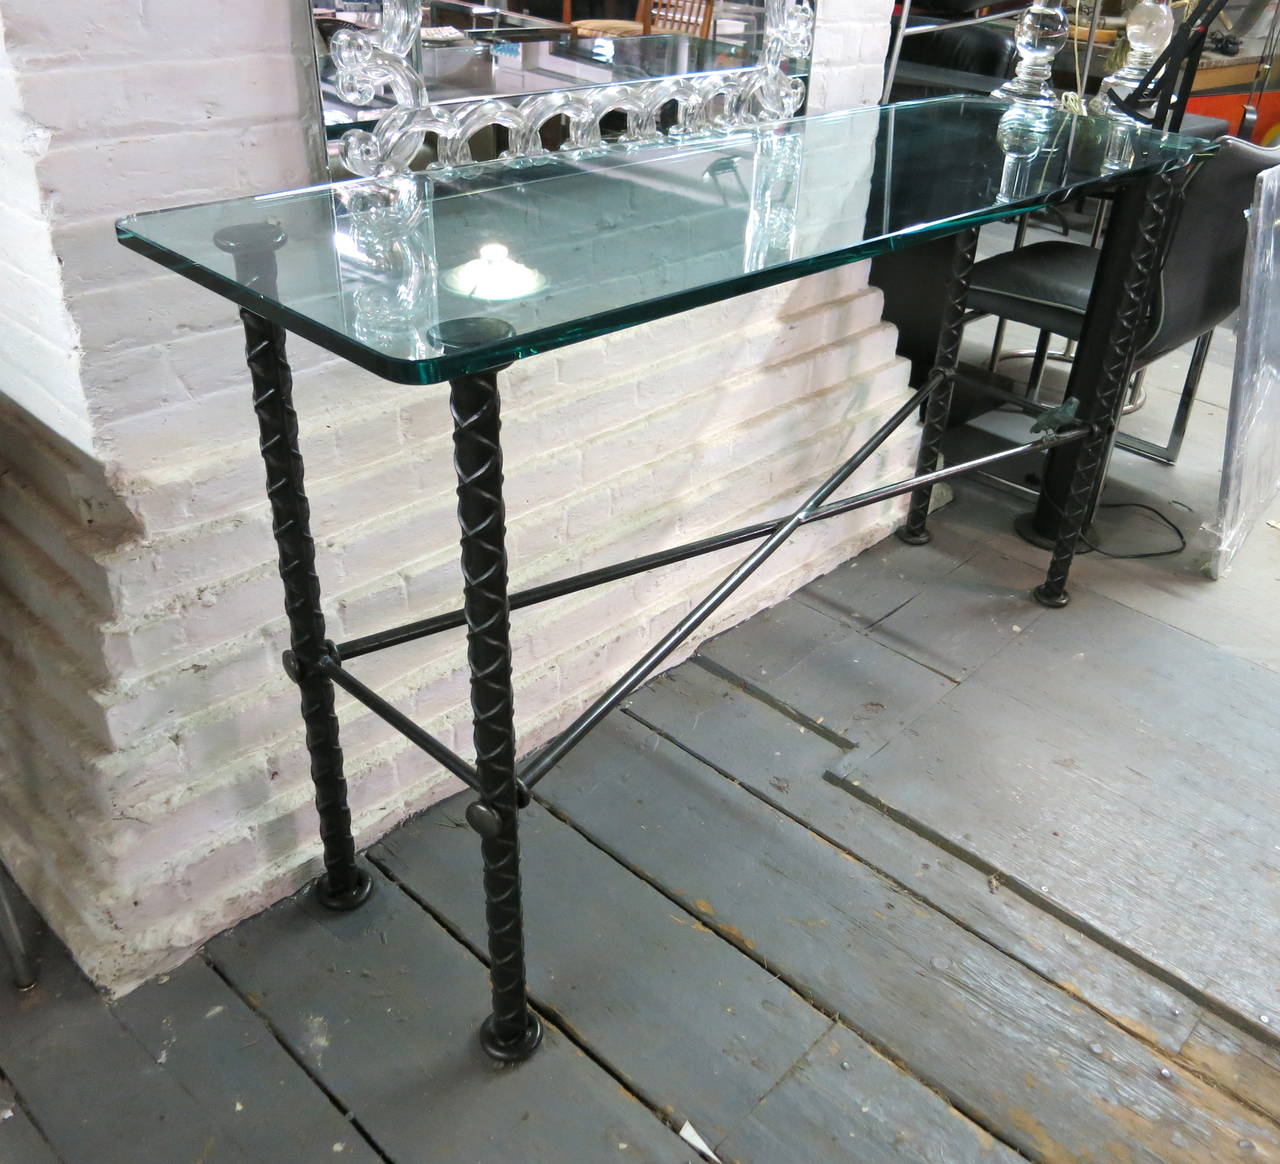 Console Table has a glass top supported by four legs connected by an X shaped stretcher that holds a figure of a bird.